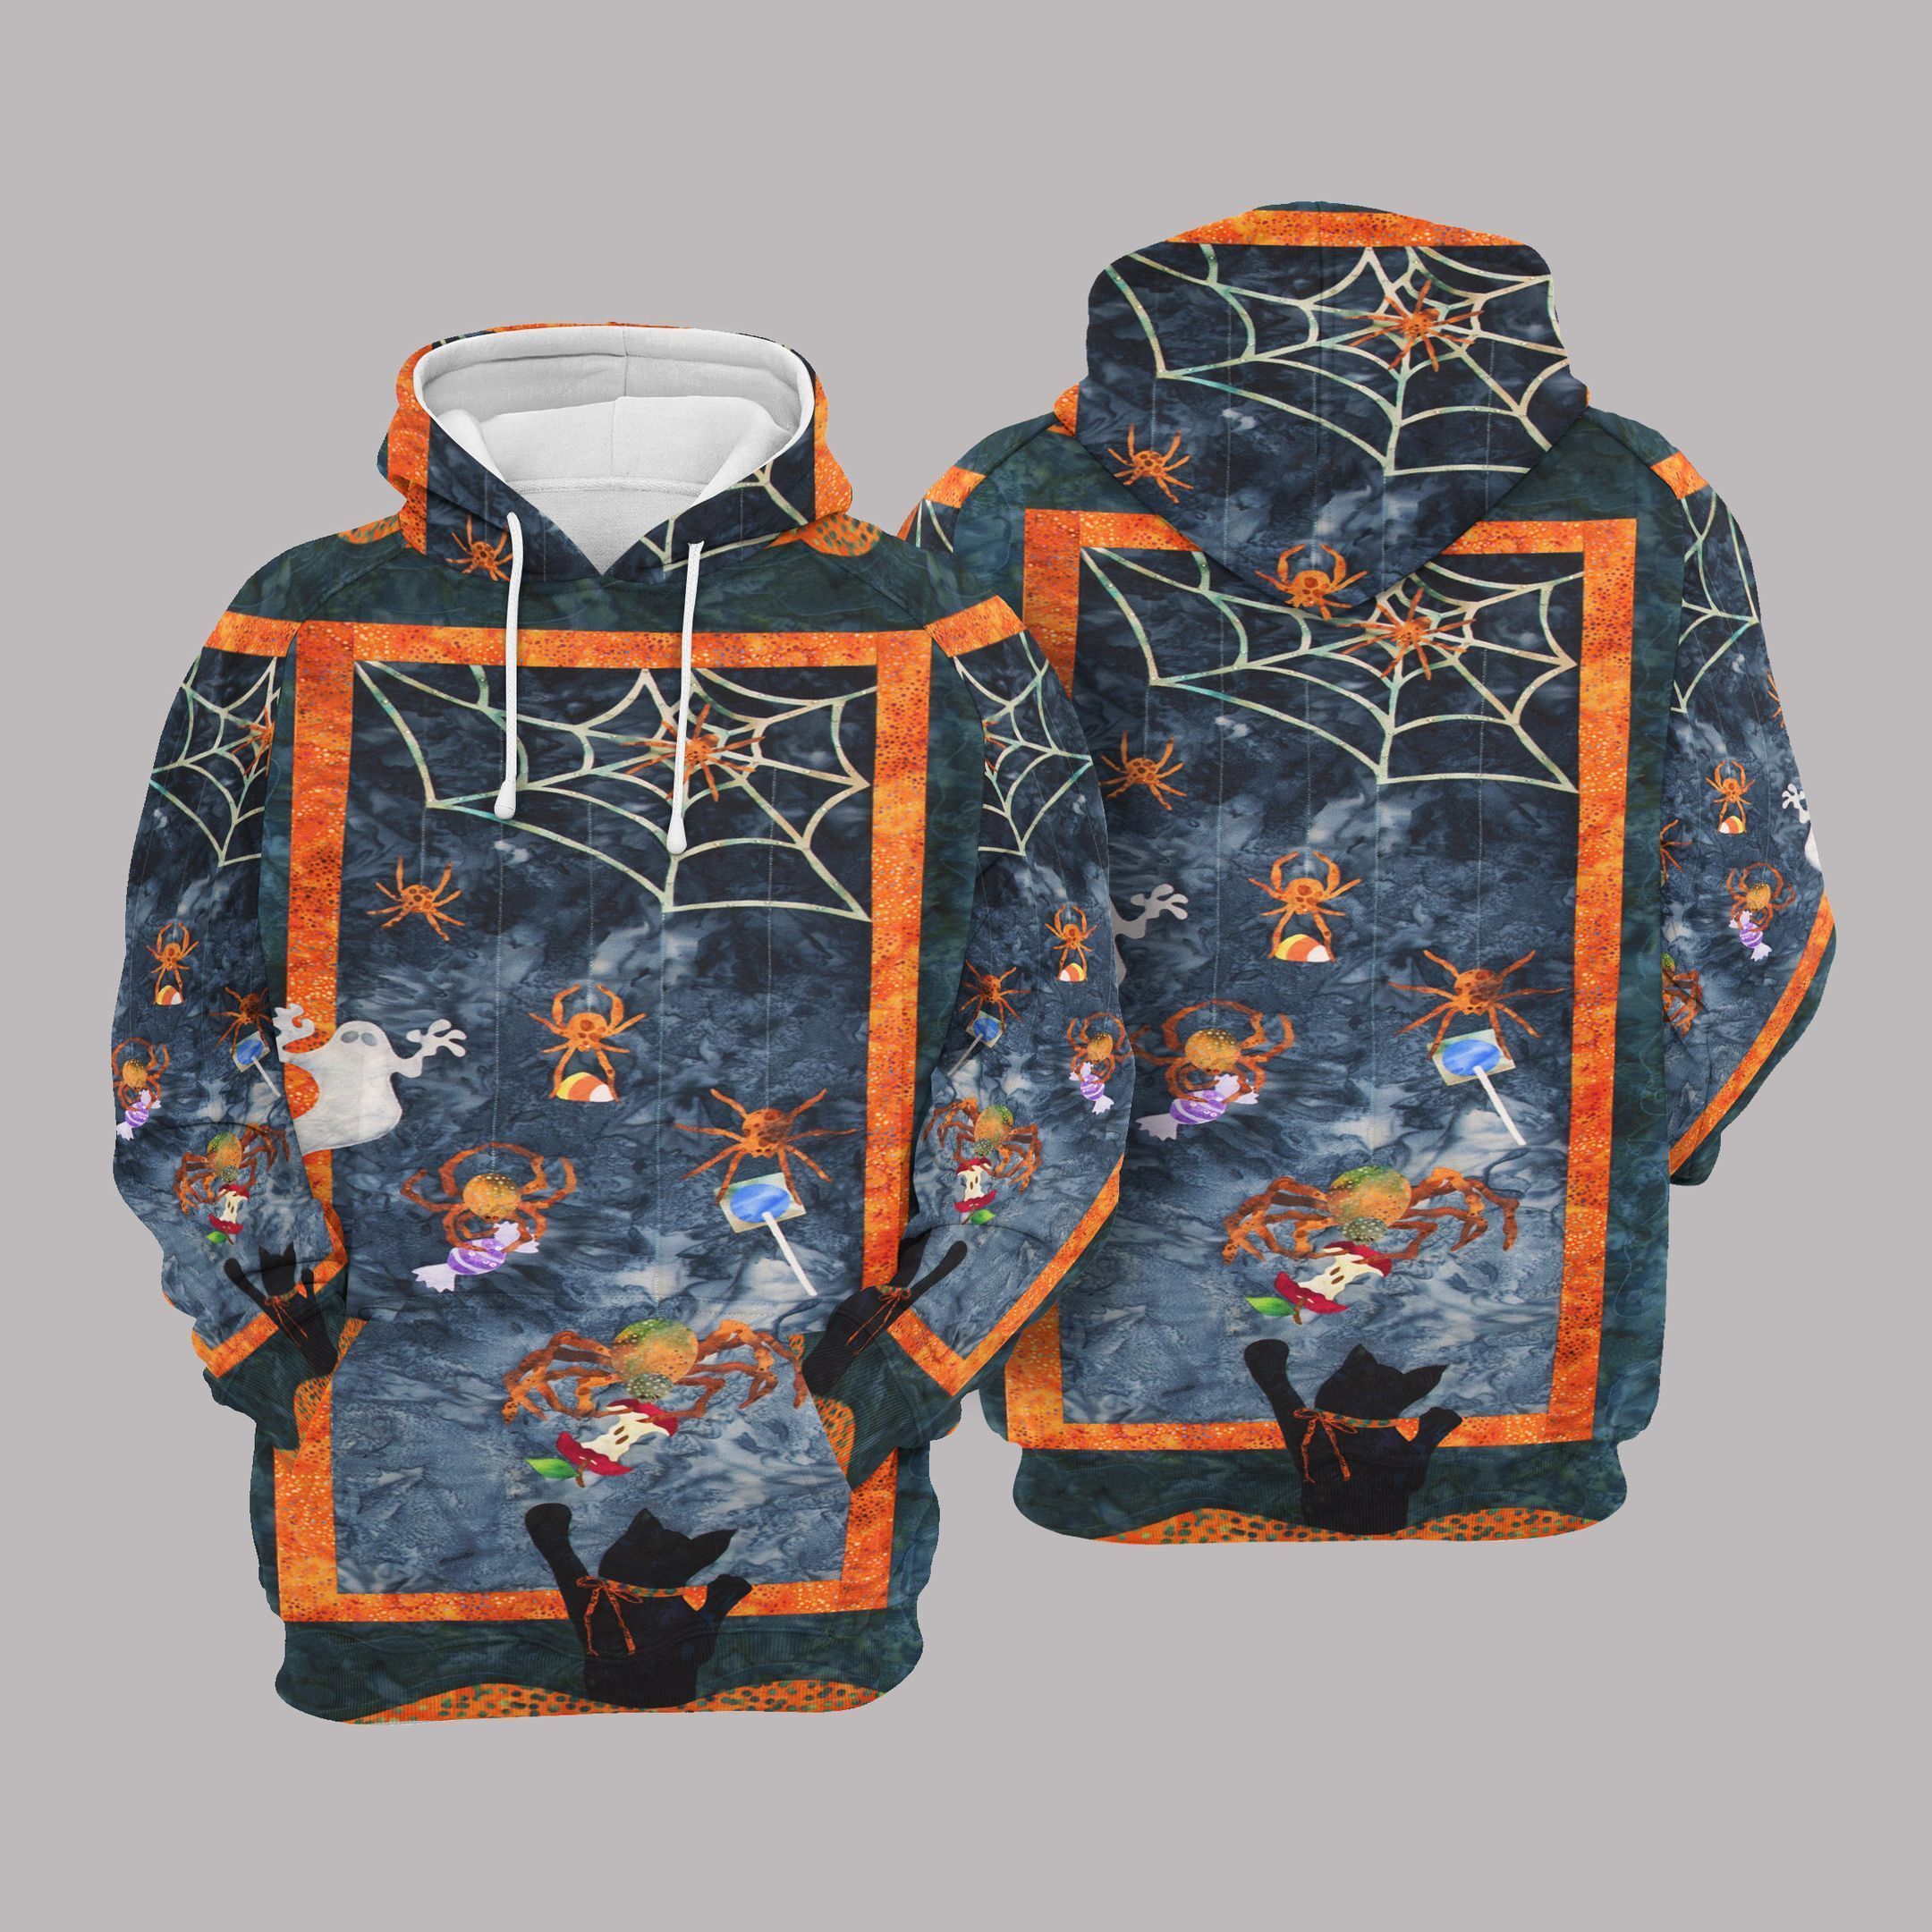 3D All Over Printed Ghost Flying Hoodies For Halloween/ Halloween Hoodies Gift For Him Her